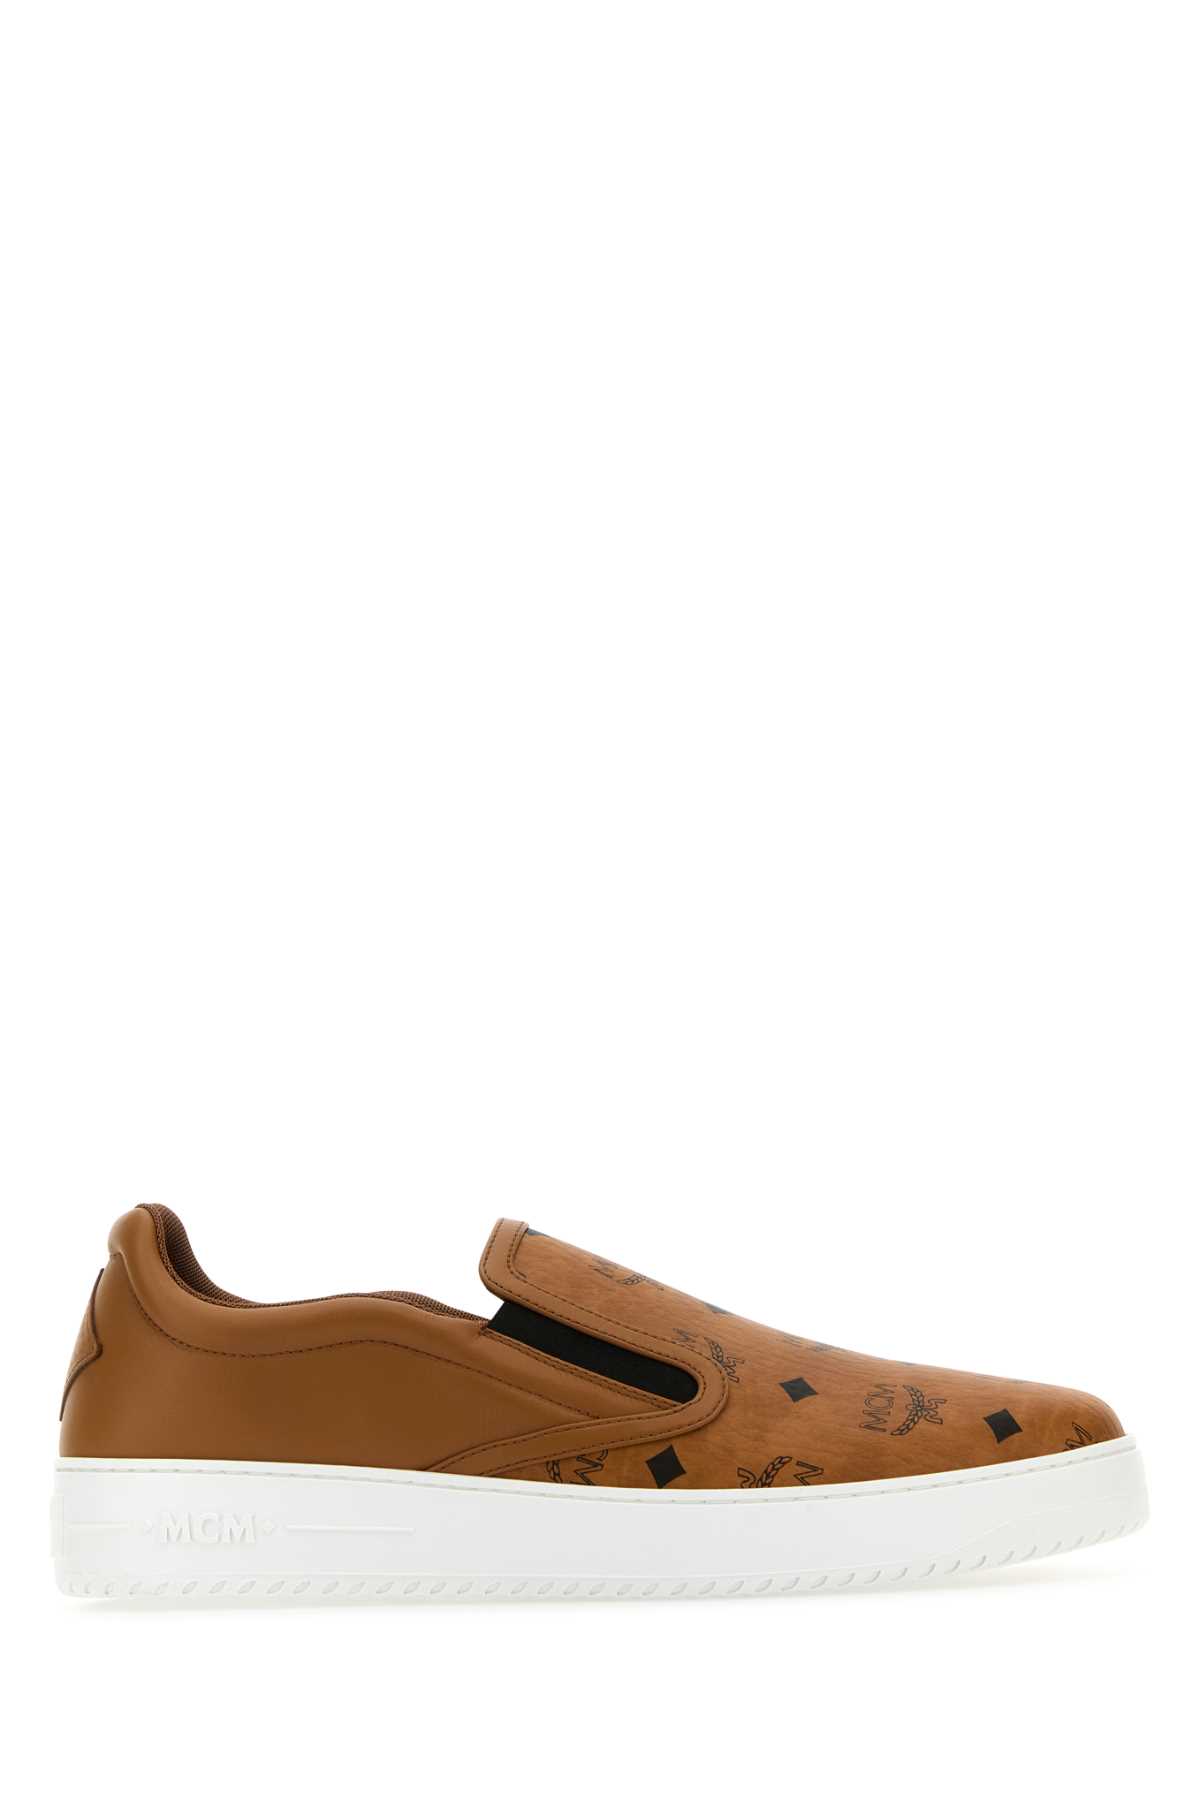 Caramel Canvas And Leather Terrain Slip Ons